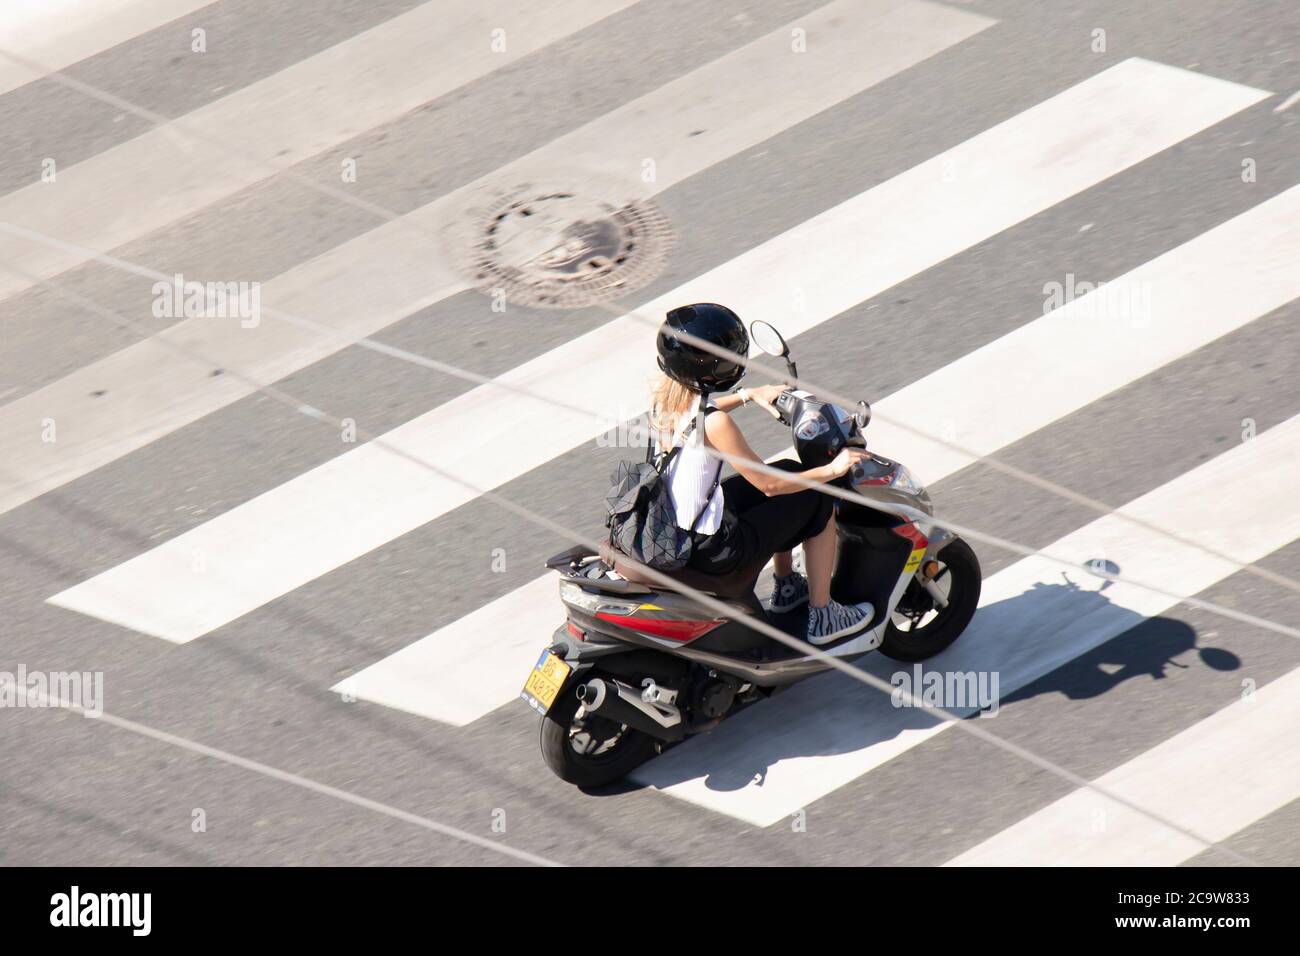 Belgrade, Serbia - July 30, 2020: Young woman riding a scooter vespa motorbike in empty city street pelican crossing, from above Stock Photo